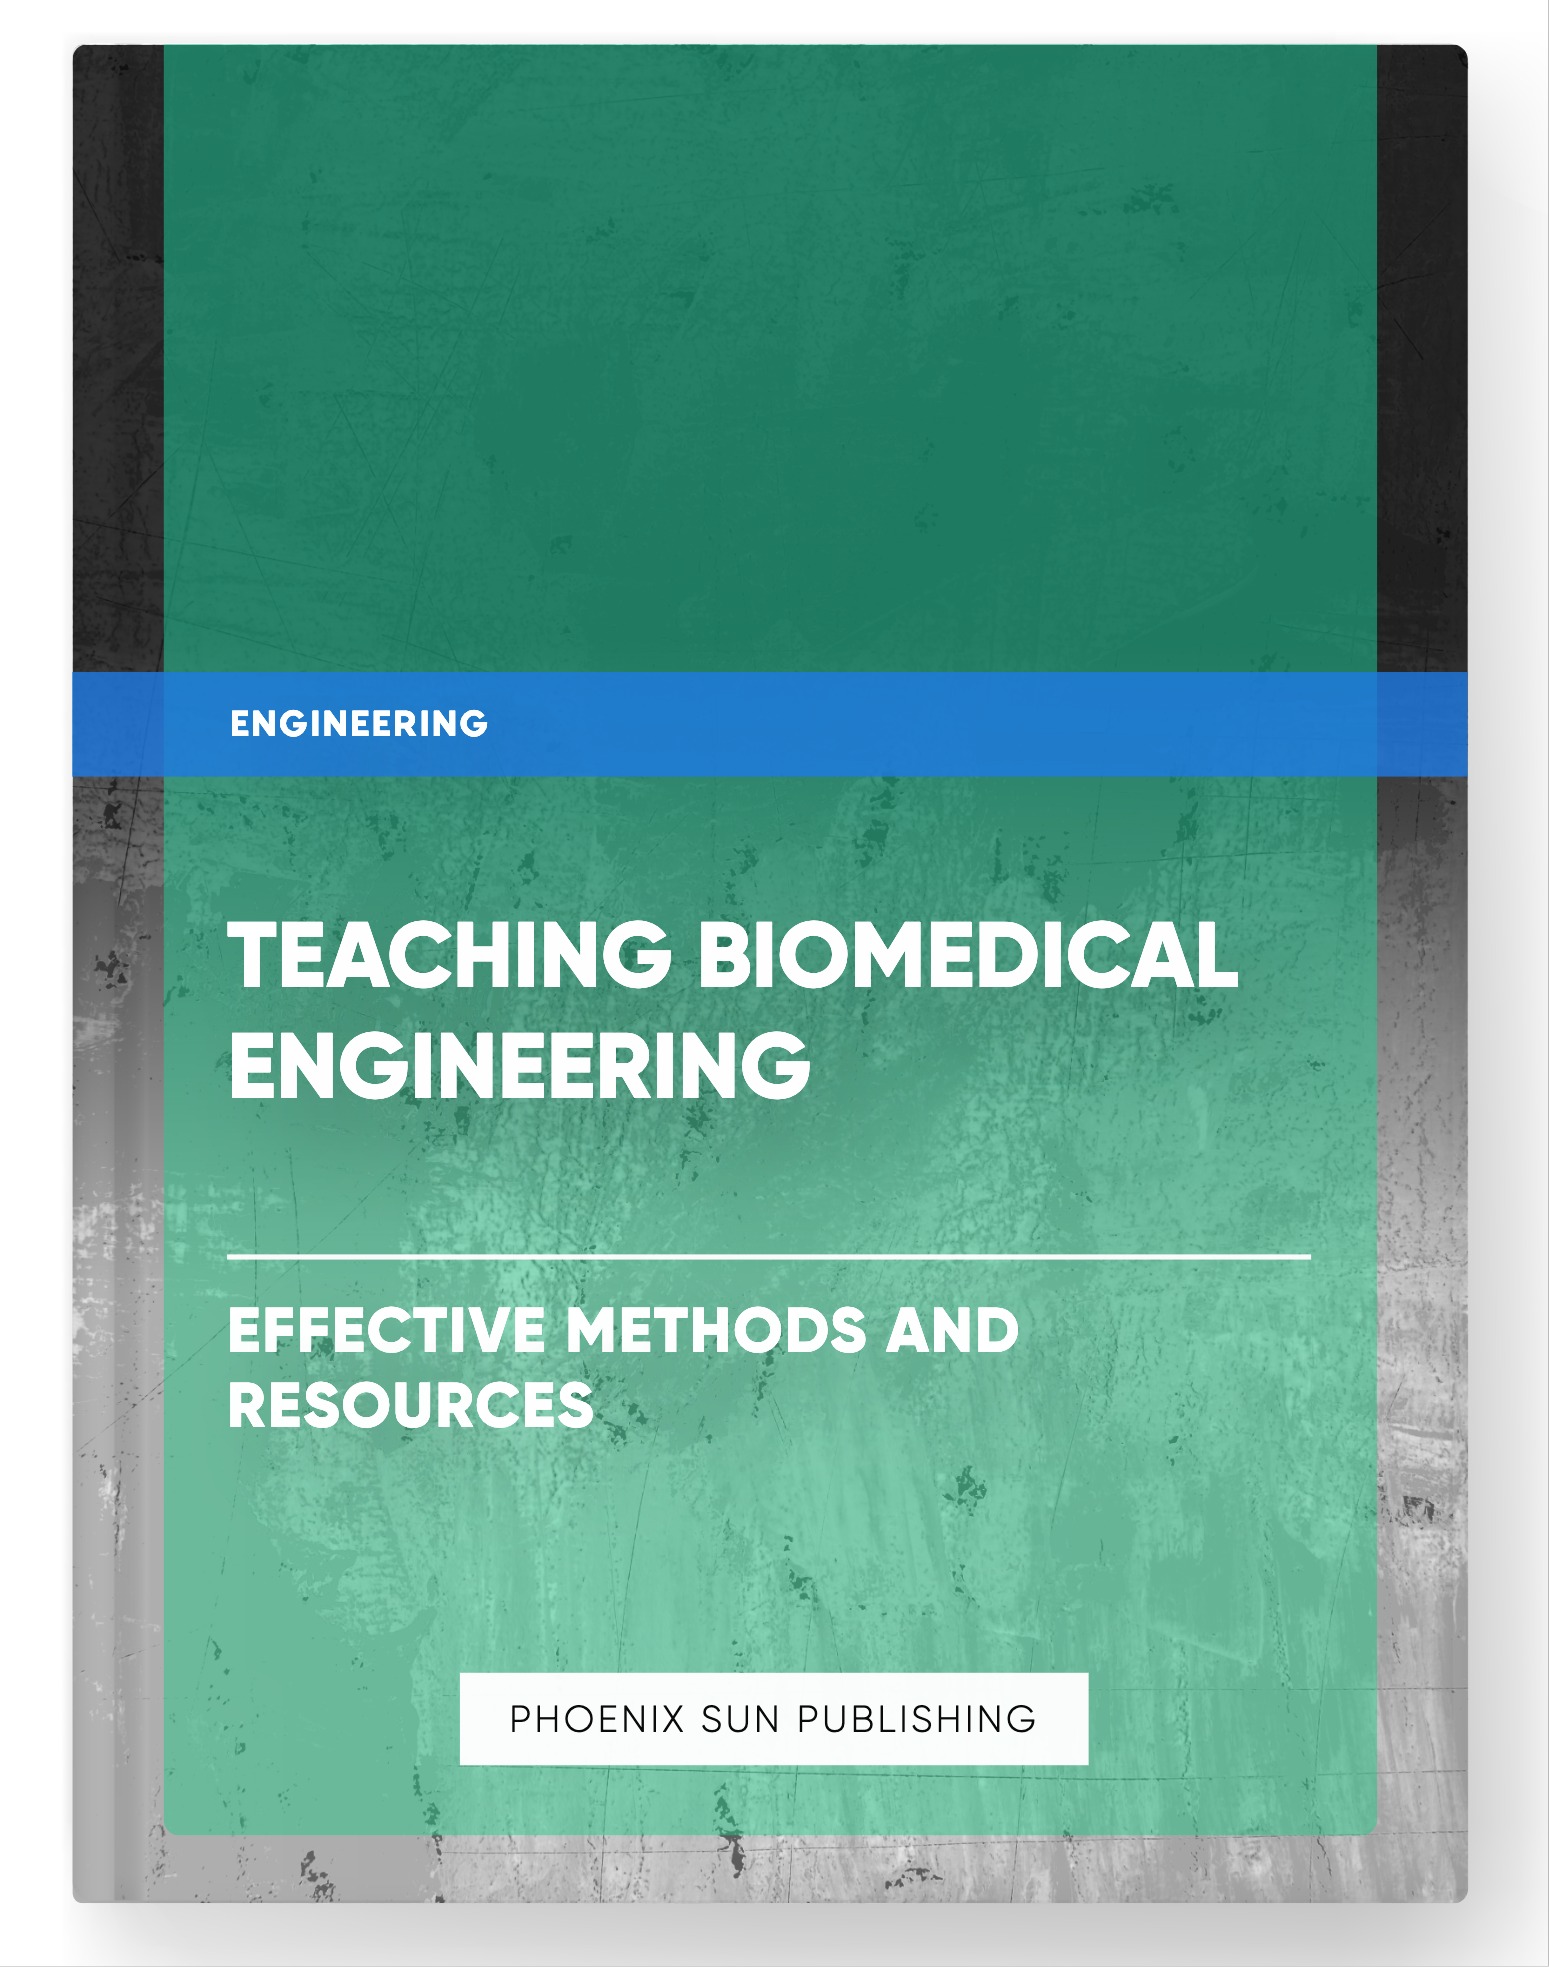 Teaching Biomedical Engineering – Effective Methods and Resources